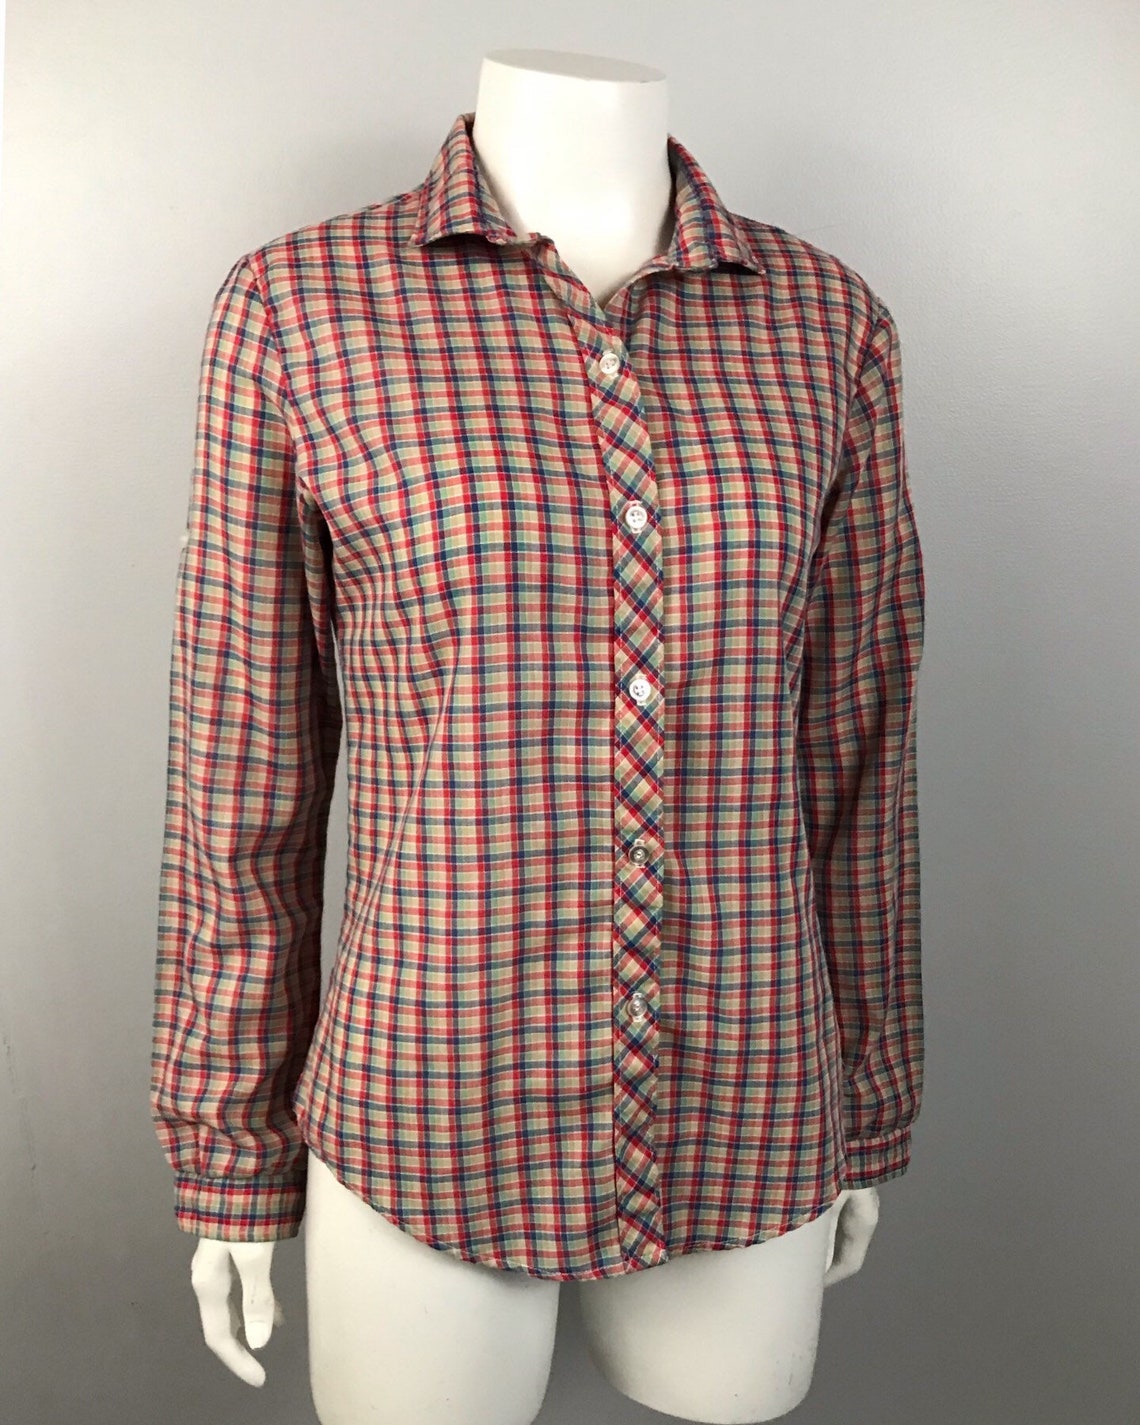 1980s Plaid Blouse Shirt / 80s Plaid Checked Button Up Top | Etsy